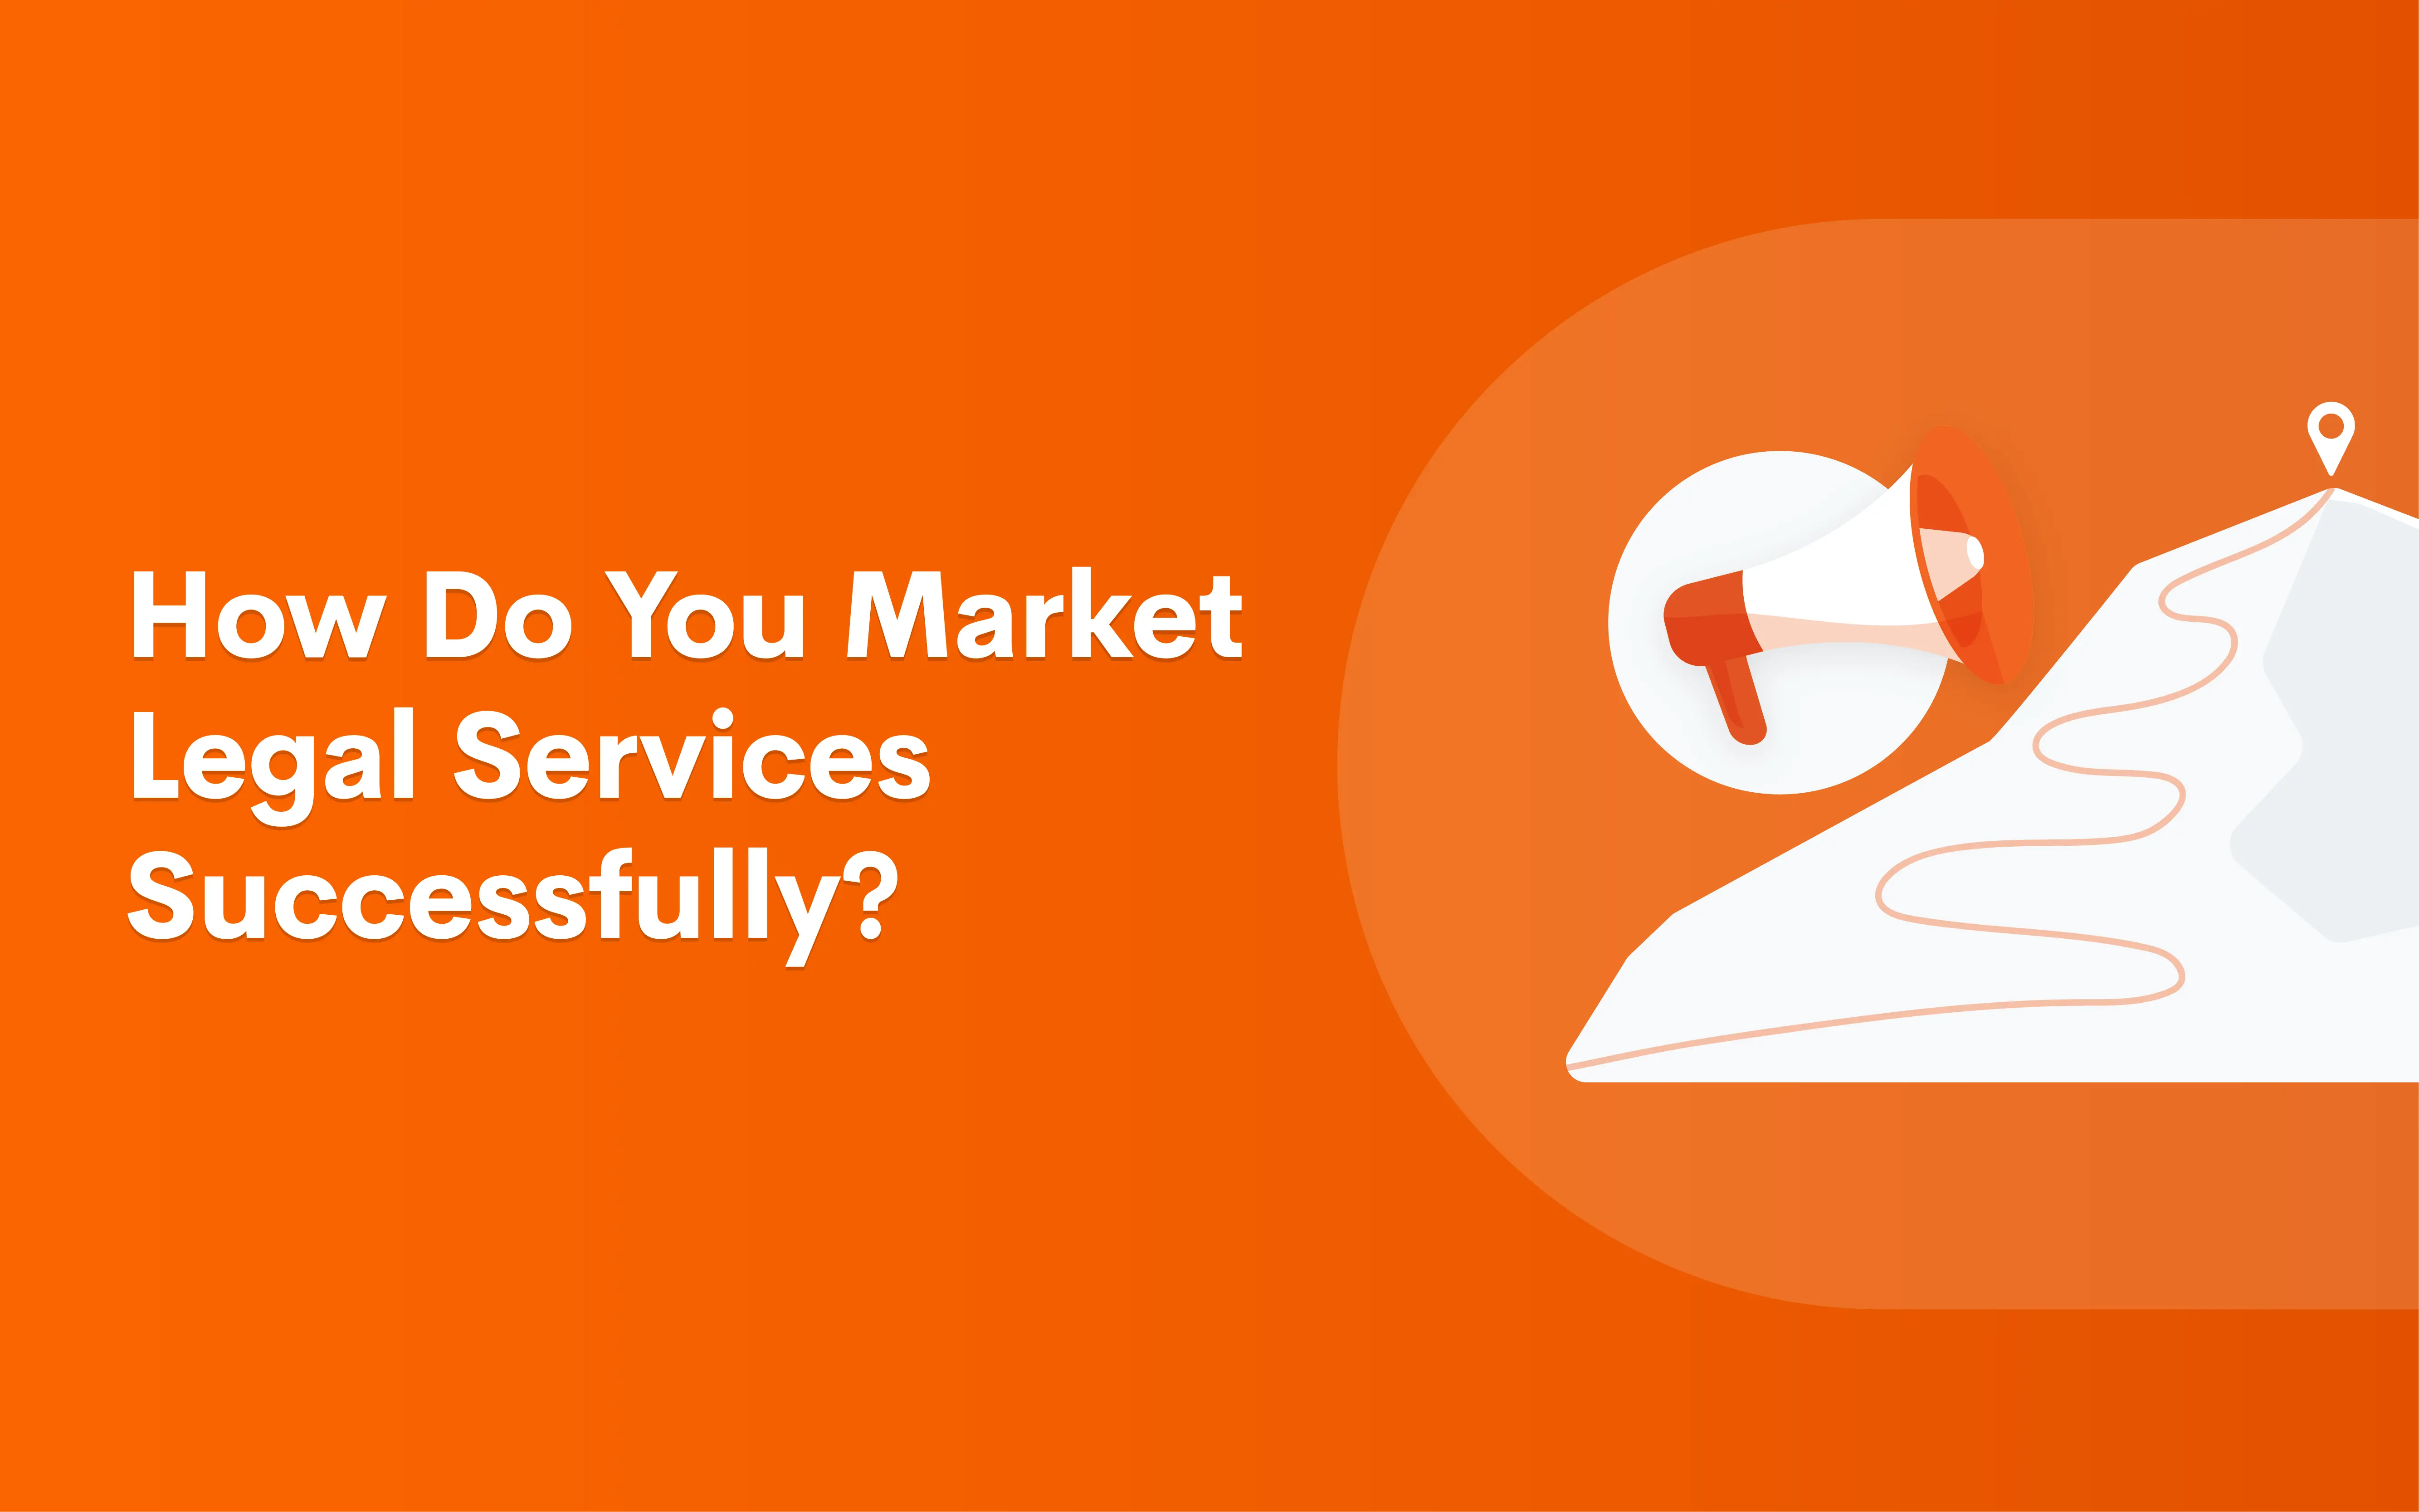 How-Do-You-Market-Legal-Services-Successfully_BLOG-02